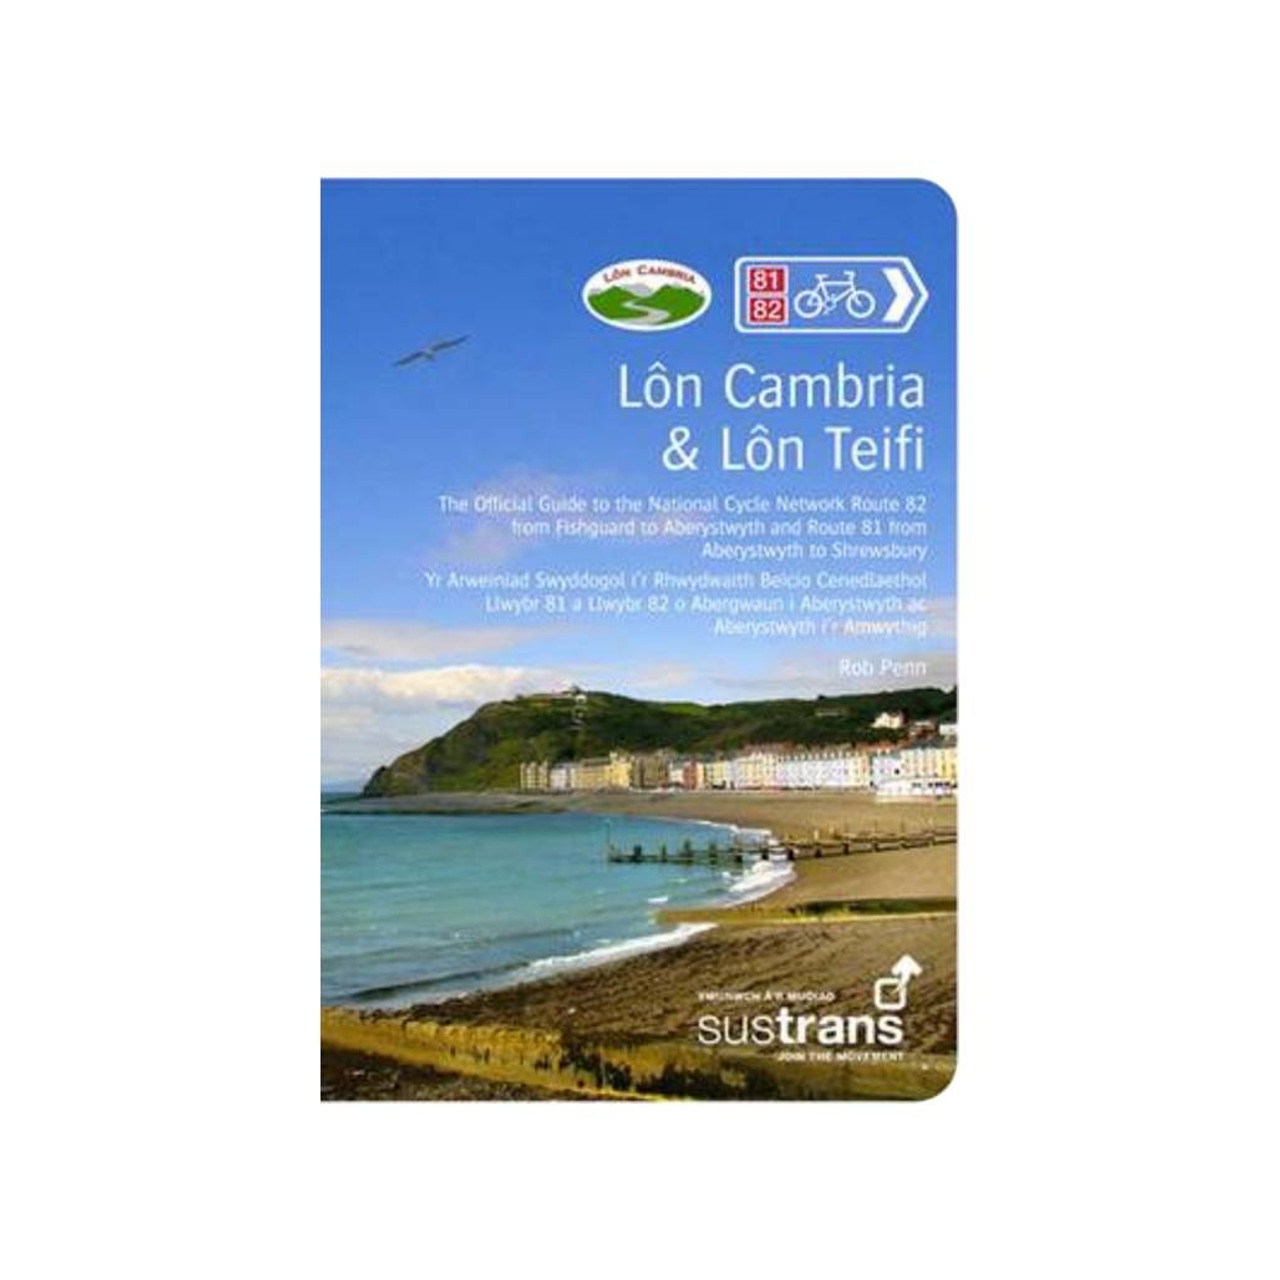 Lon CambriaandLon Teifi: The Official Guide To The National Cycle Network Route 81and82